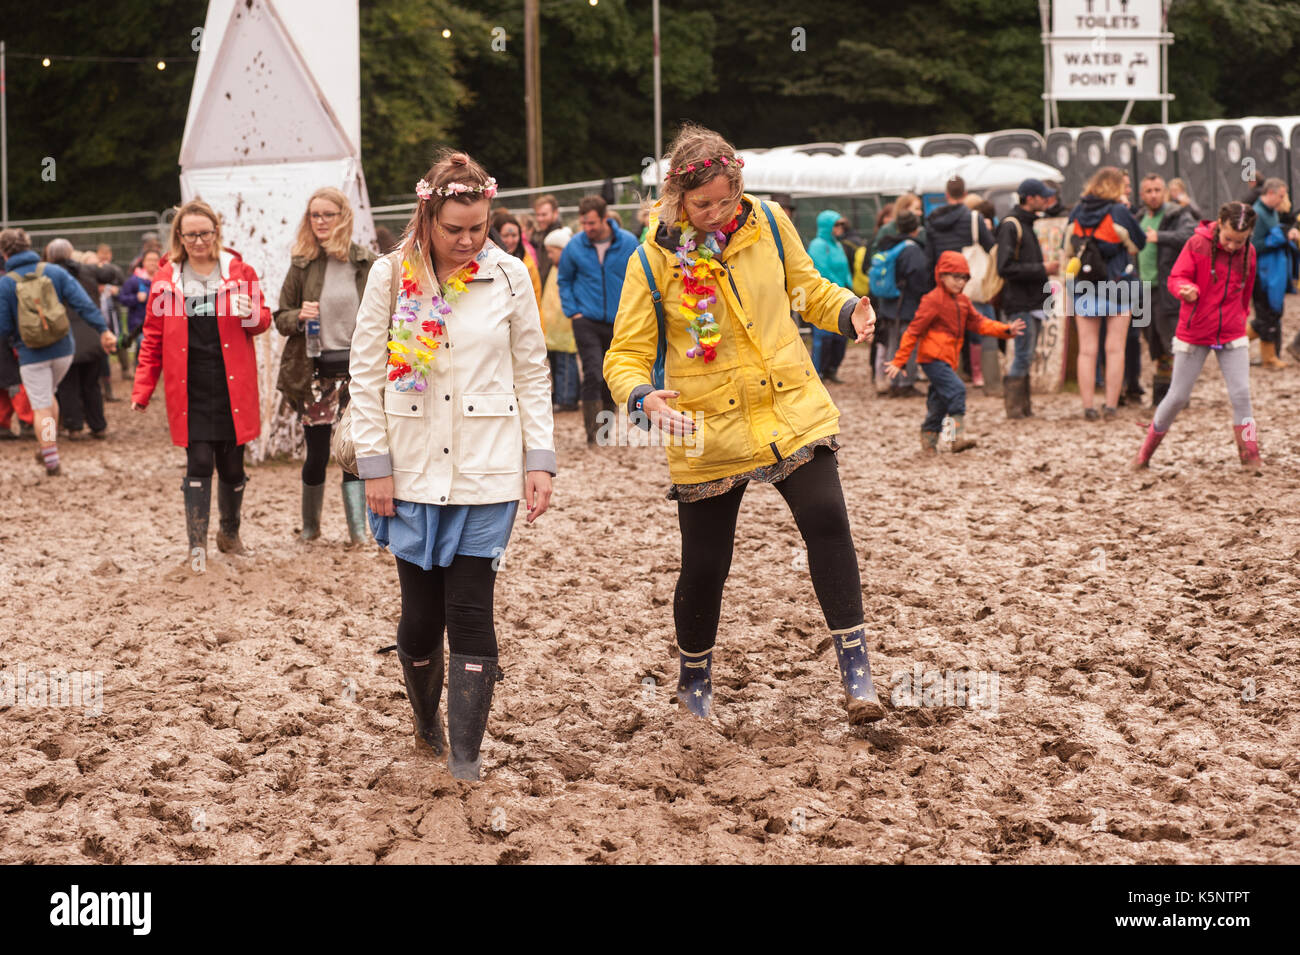 Portmeirion, Wales, UK. 10th September, 2017. Festival goers  brave the muddy conditions at Festival Number 6, Portmeirion, Wales 10th September, 2017. Credit: Ken Harrison/Alamy Live News Stock Photo